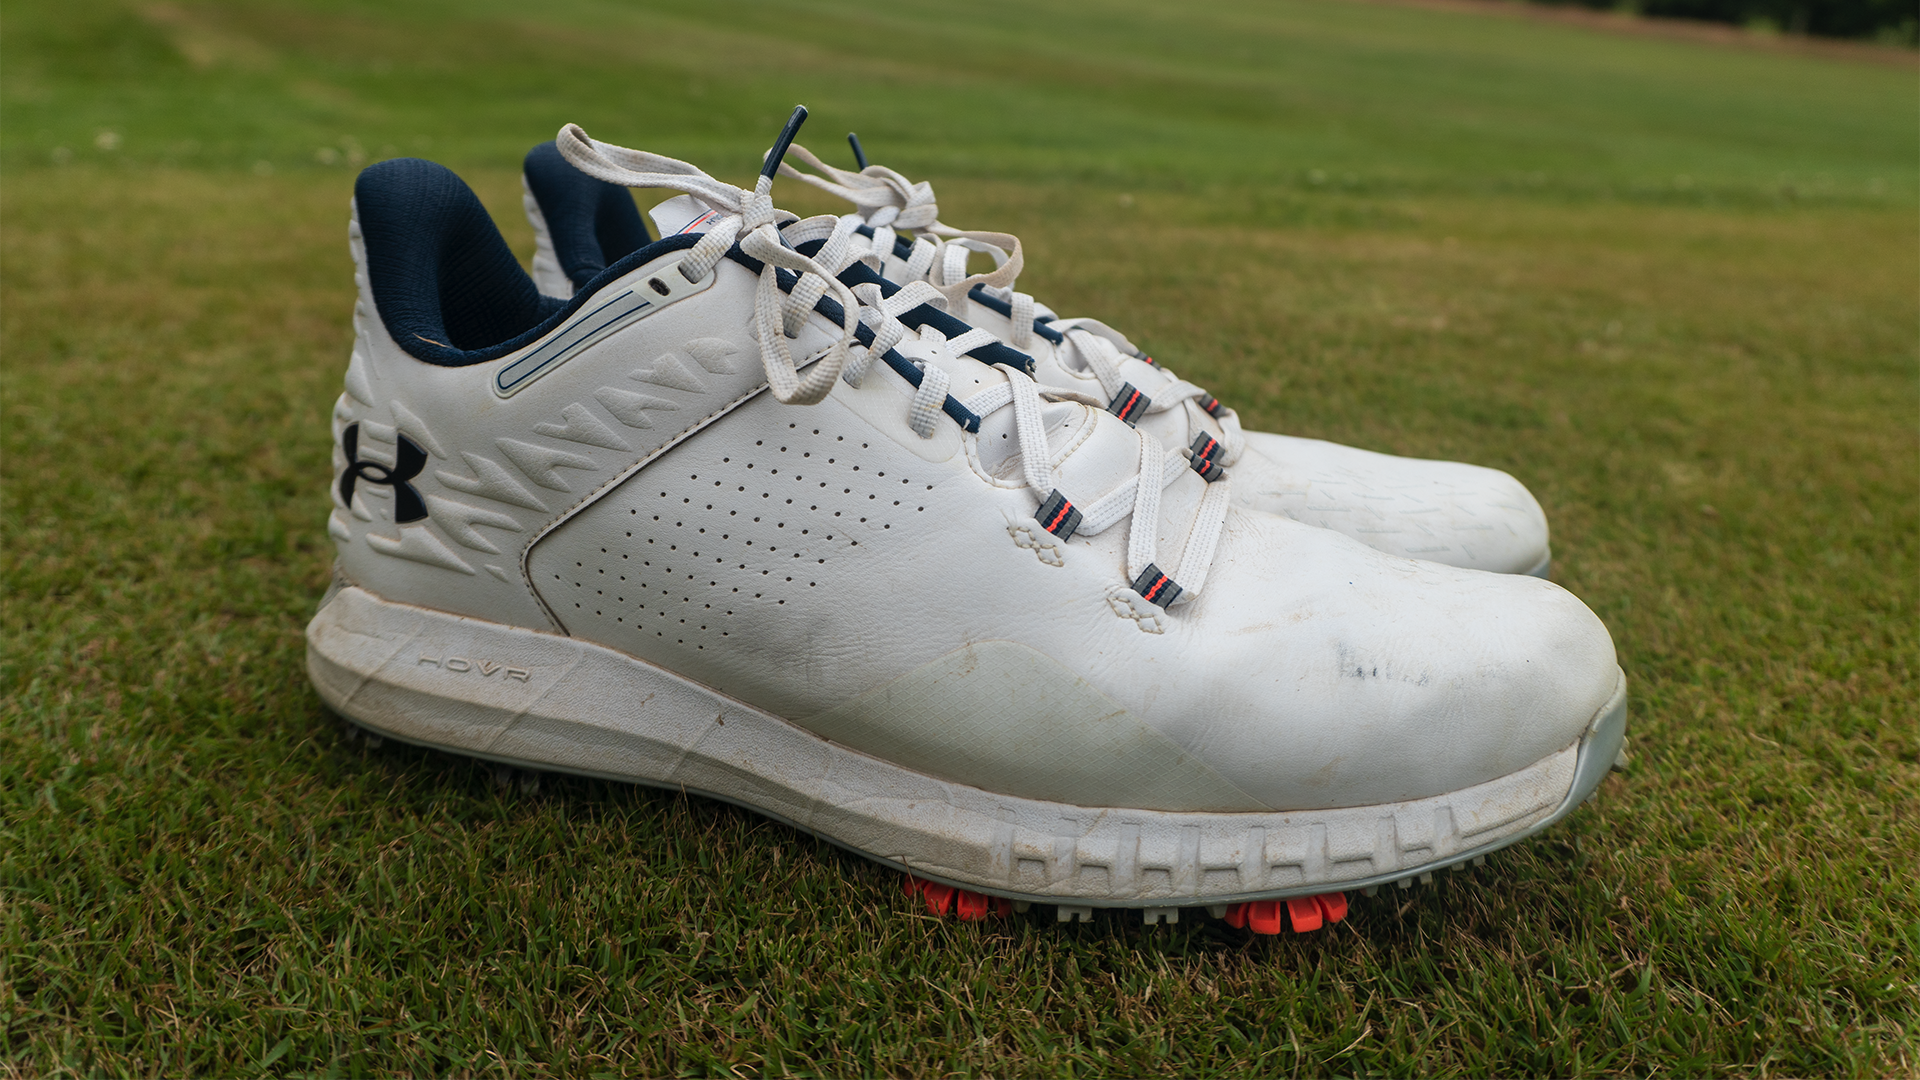 Under Armour HOVR Drive 2 Golf Shoes 